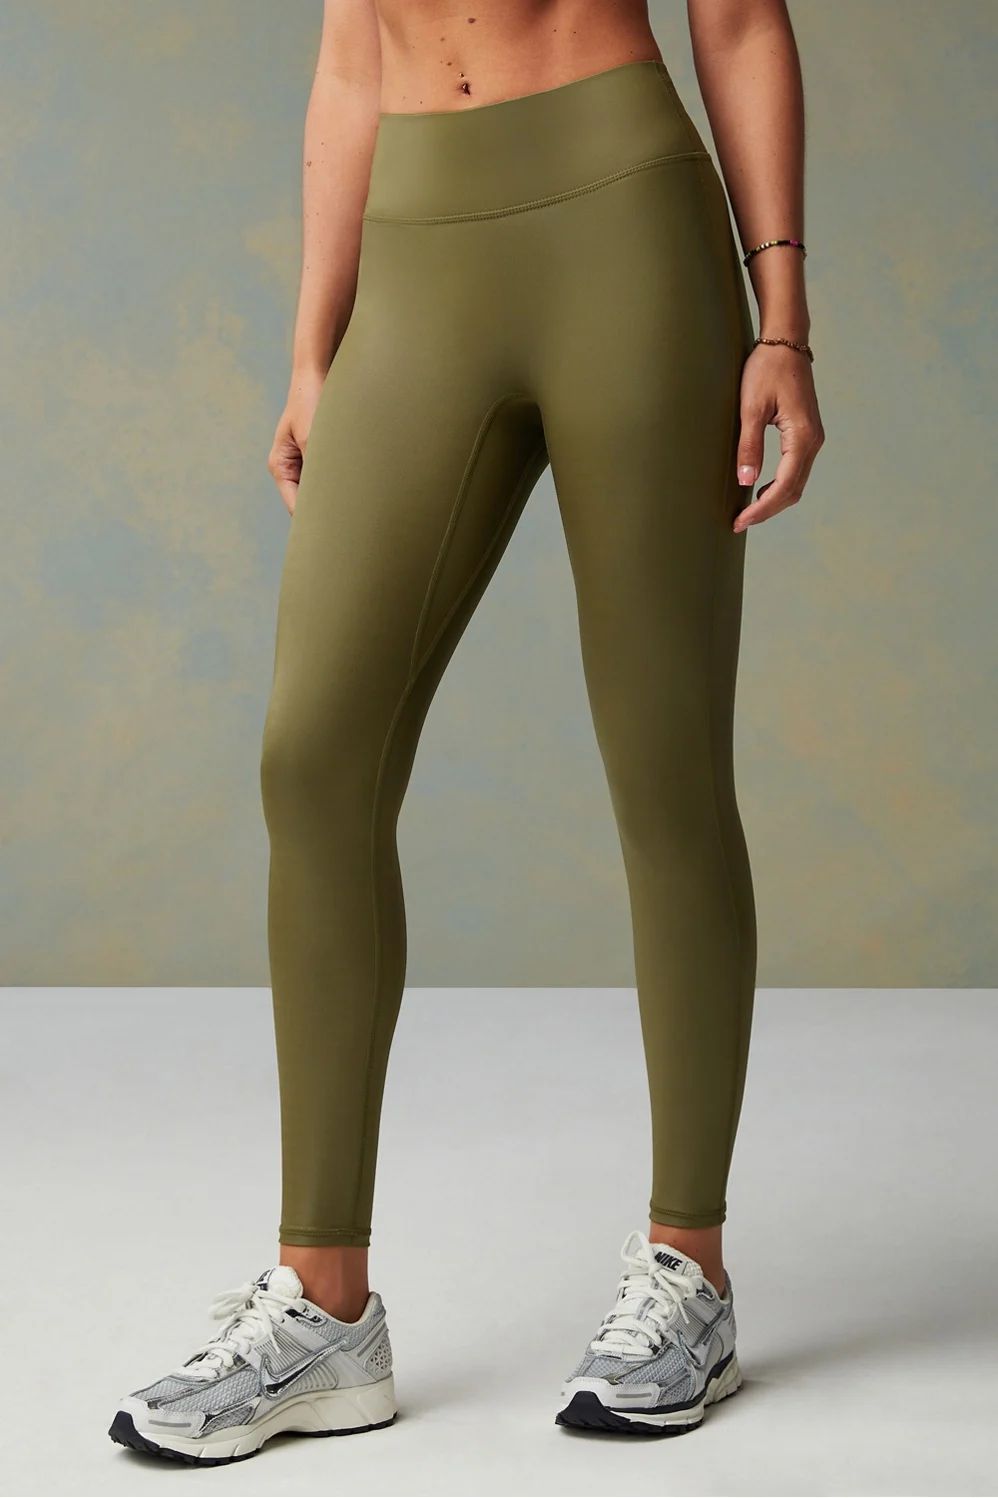 Anywhere Motion365+ Shine High-Waisted Legging | Fabletics - North America